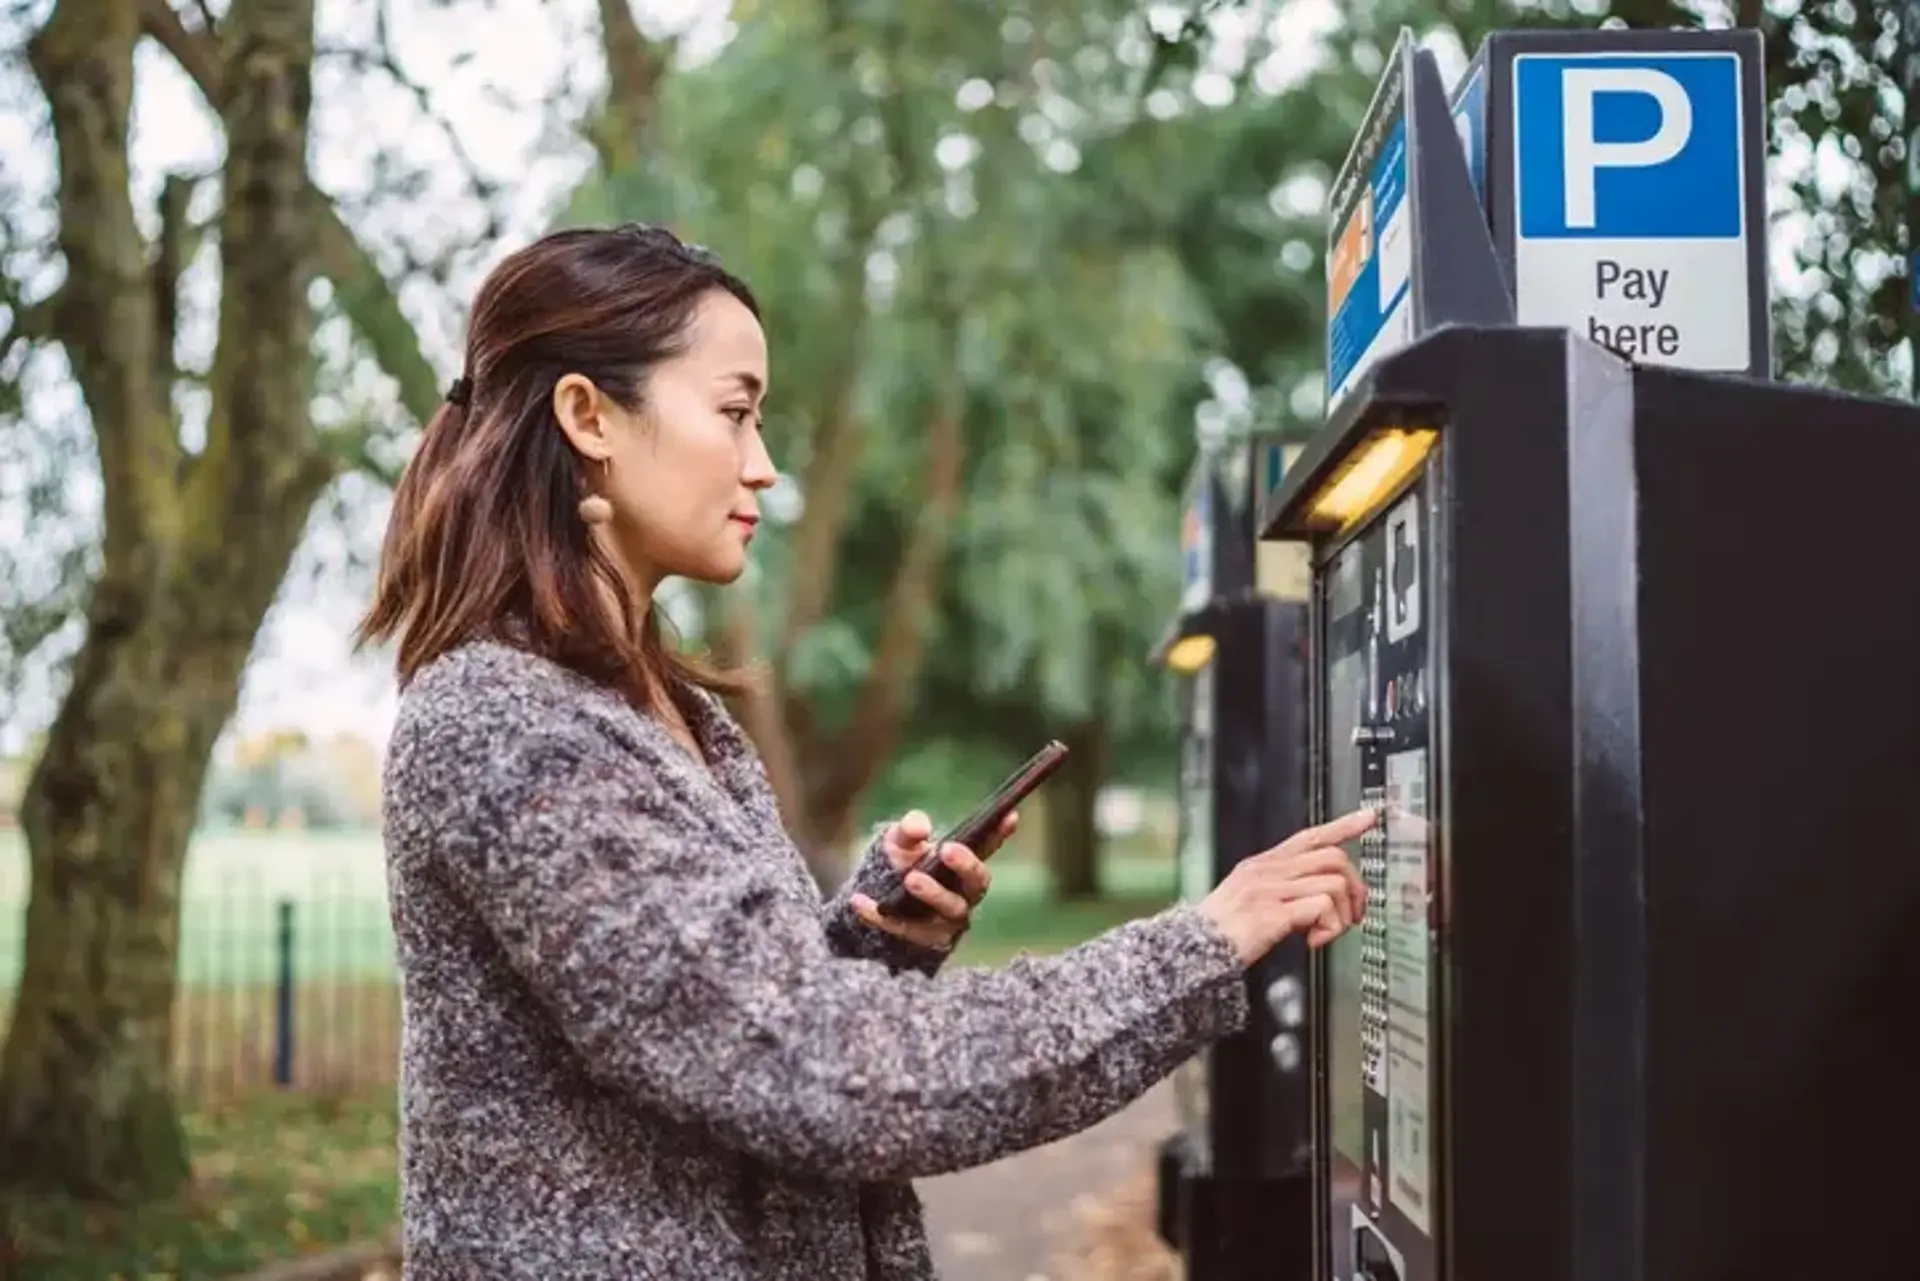  woman making contactless payment with smartphone at parking payment machine in city street 